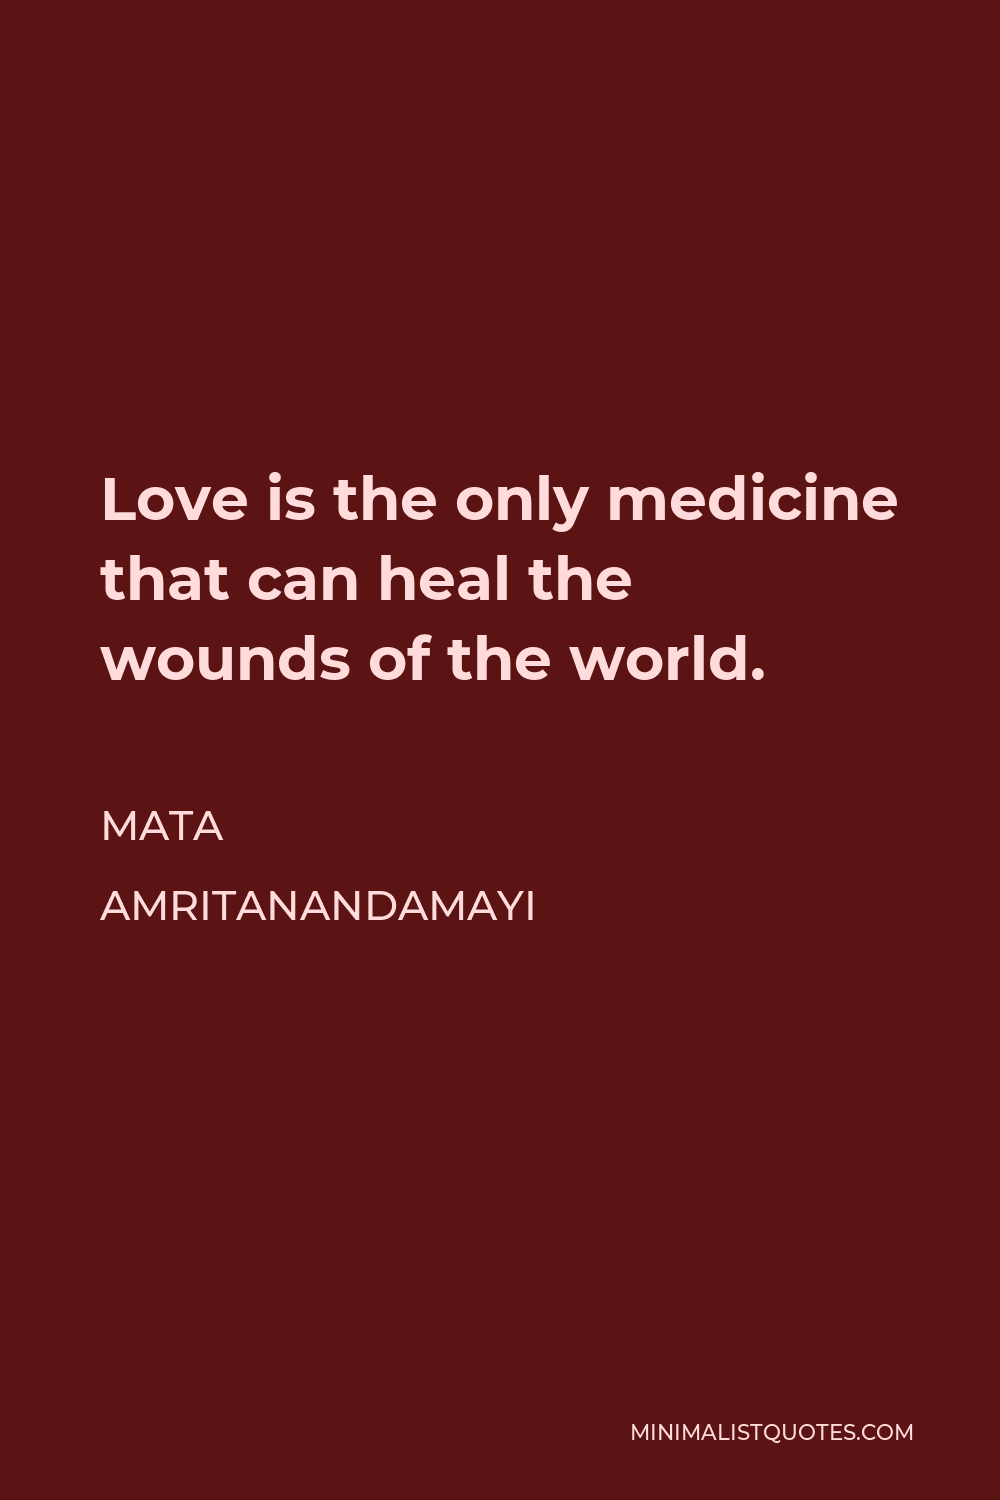 Mata Amritanandamayi Quote - Love is the only medicine that can heal the wounds of the world.